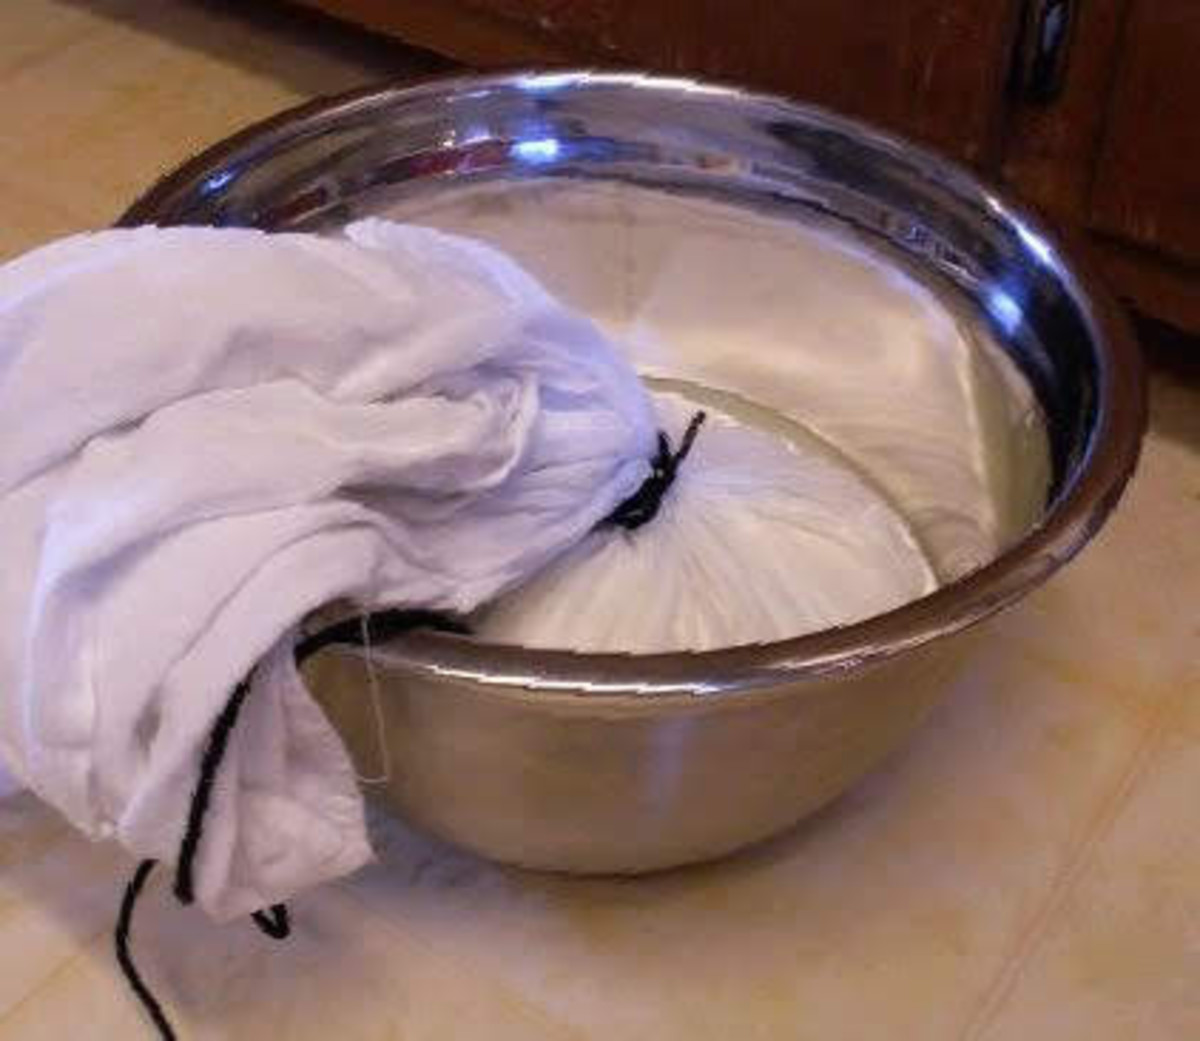 If you have more than one towel full of curds, as each releases most of its whey, tie it up and place it in a waiting bowl so you can get the next one draining.